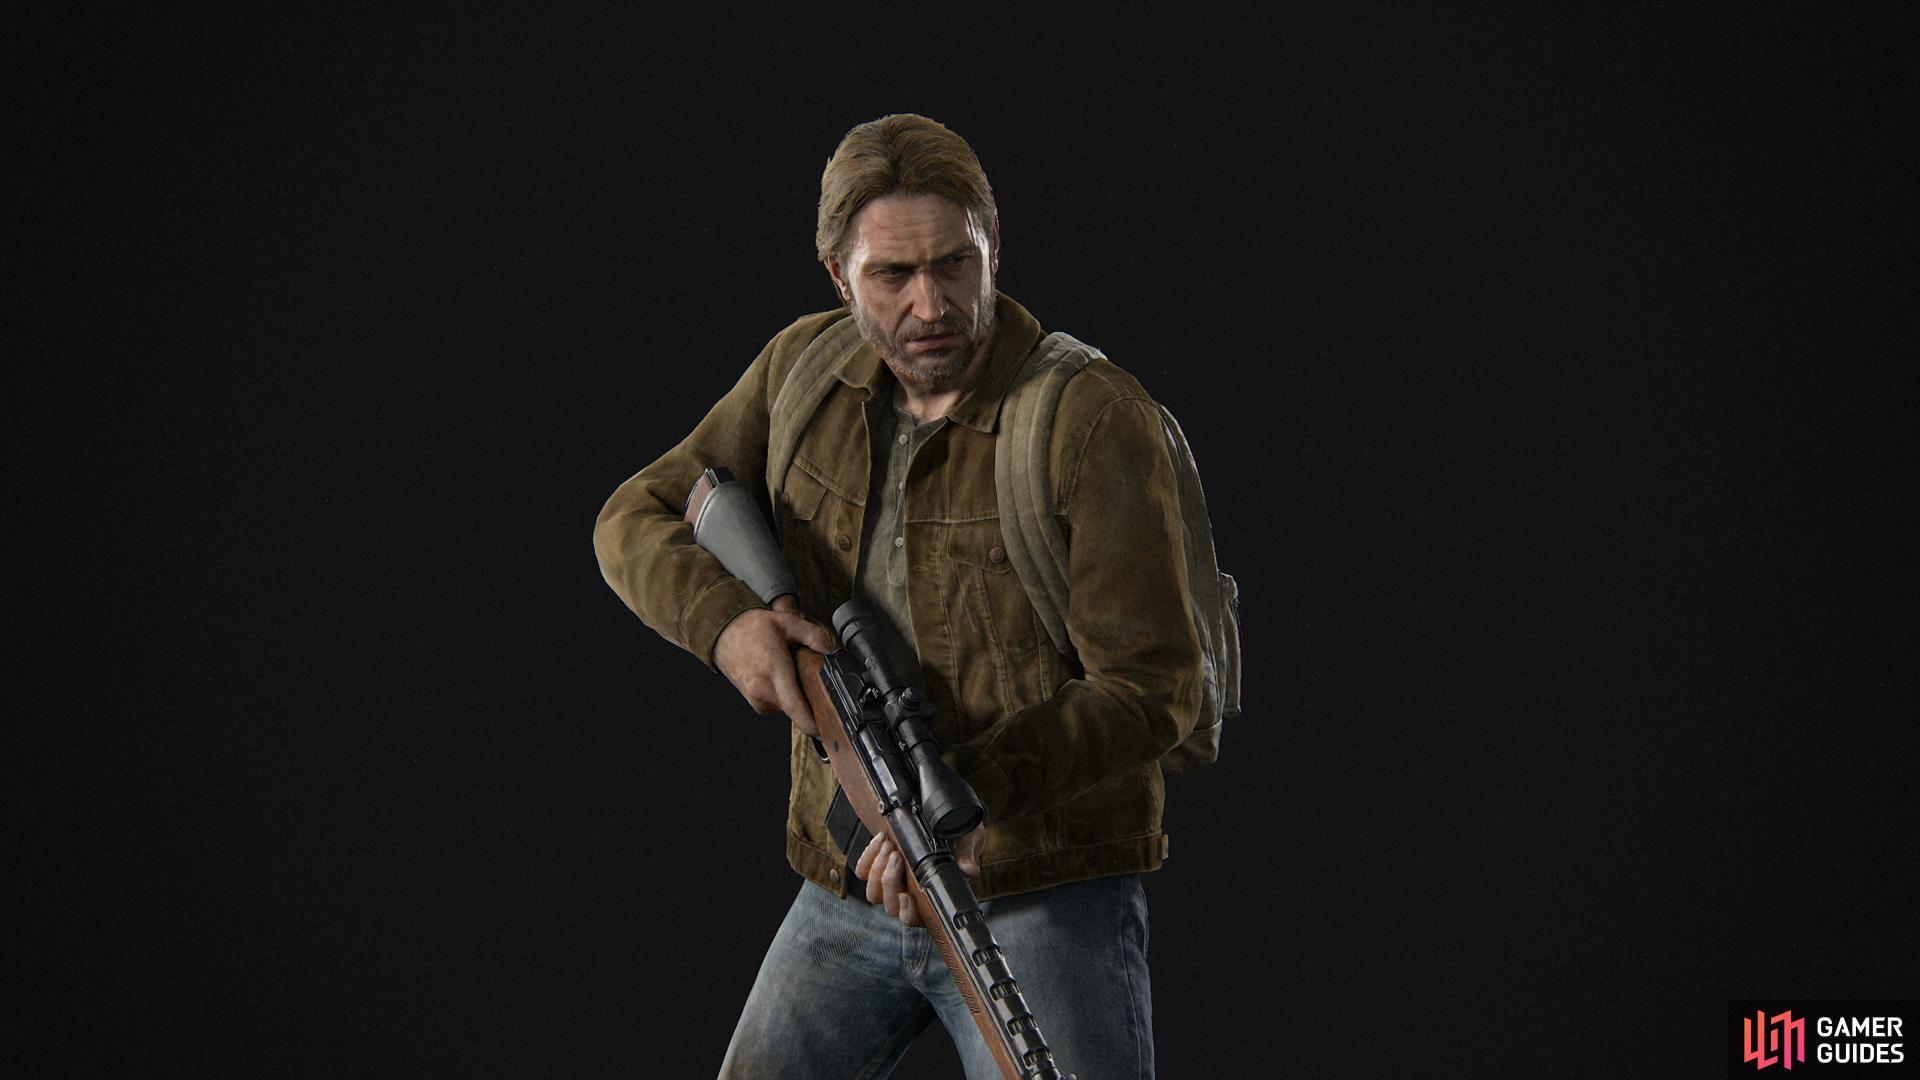 Who Plays Tommy in 'The Last of Us?